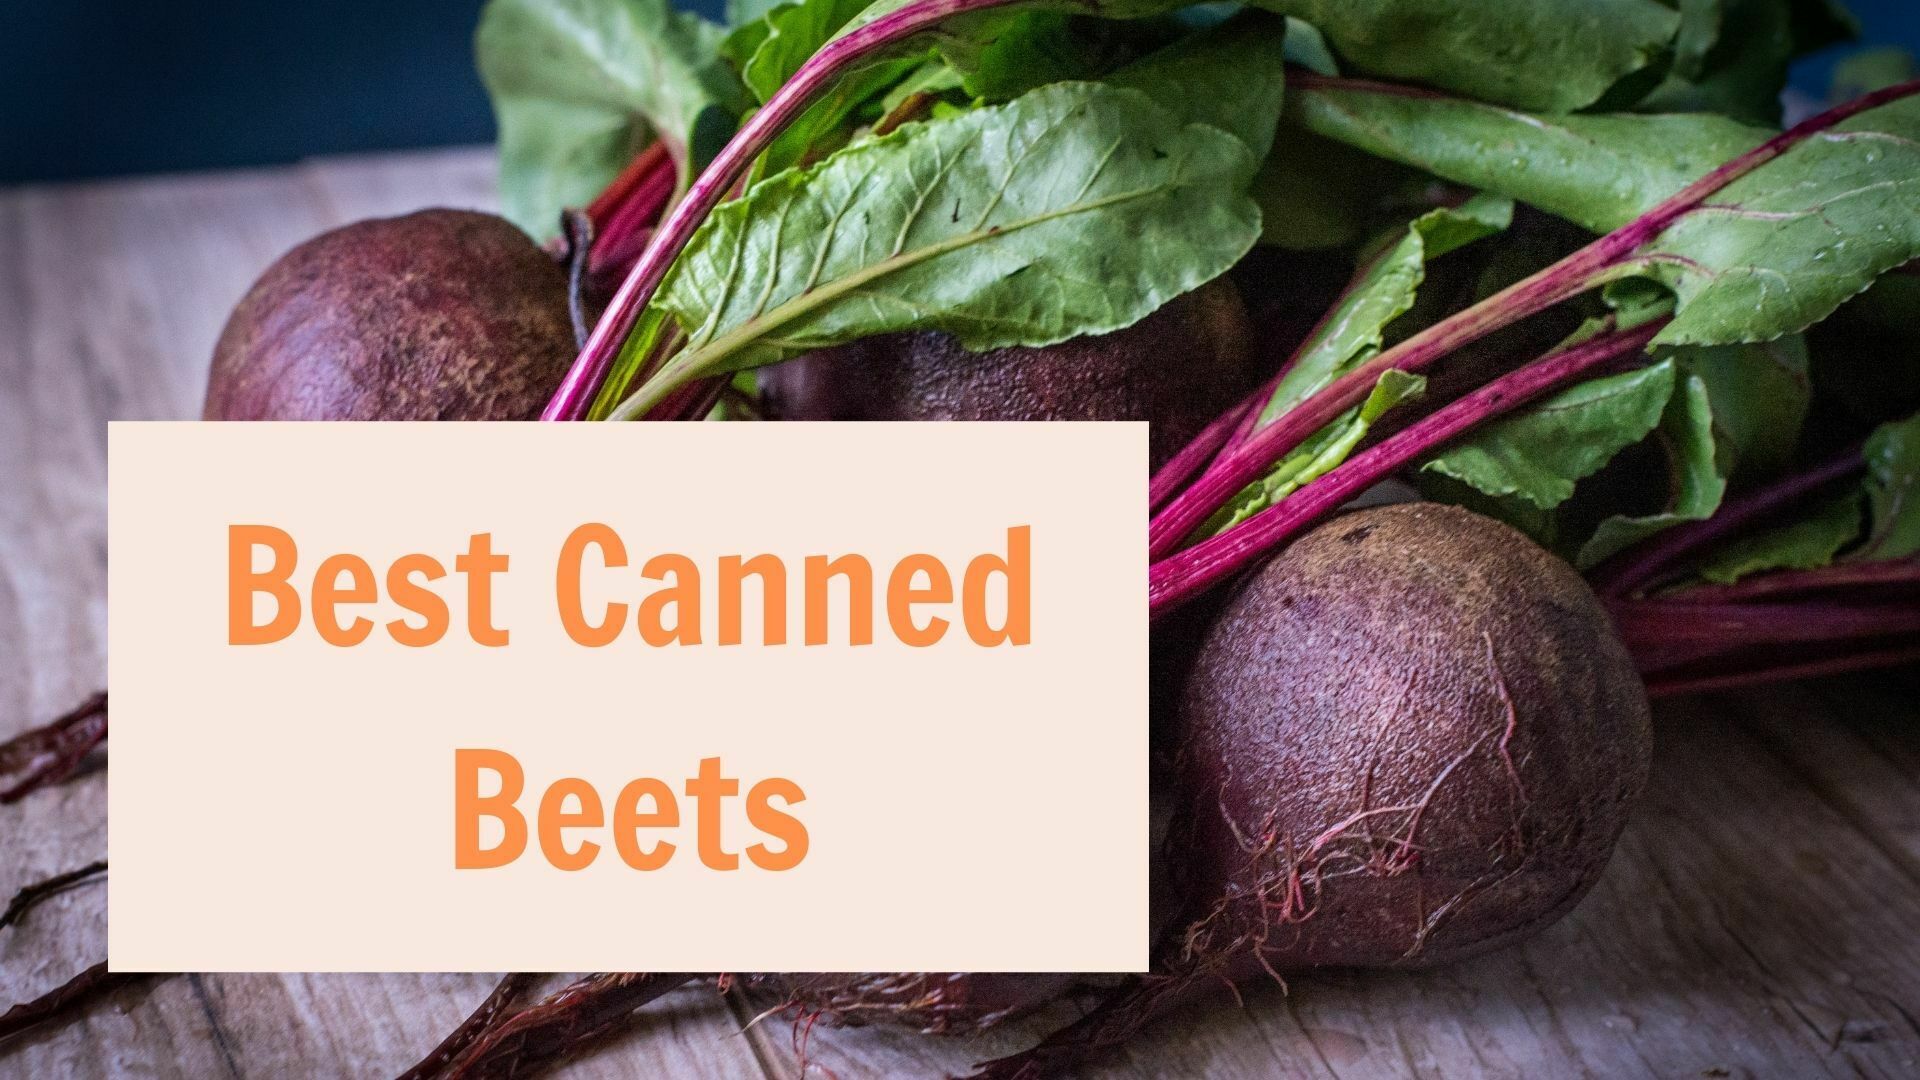 Best Canned Beets